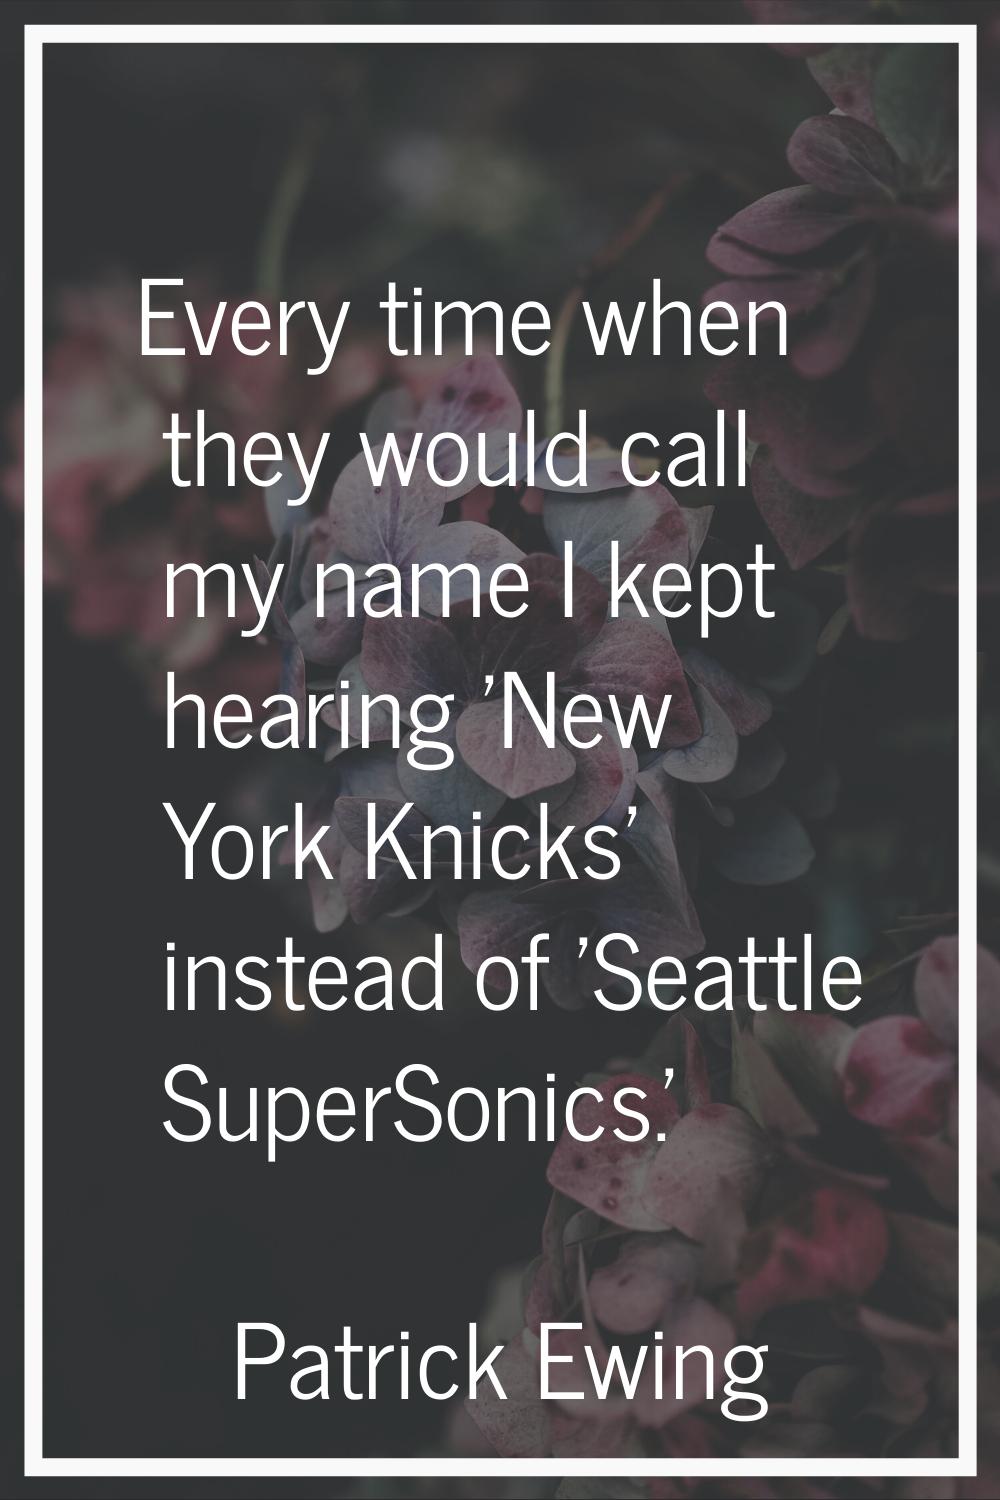 Every time when they would call my name I kept hearing 'New York Knicks' instead of 'Seattle SuperS